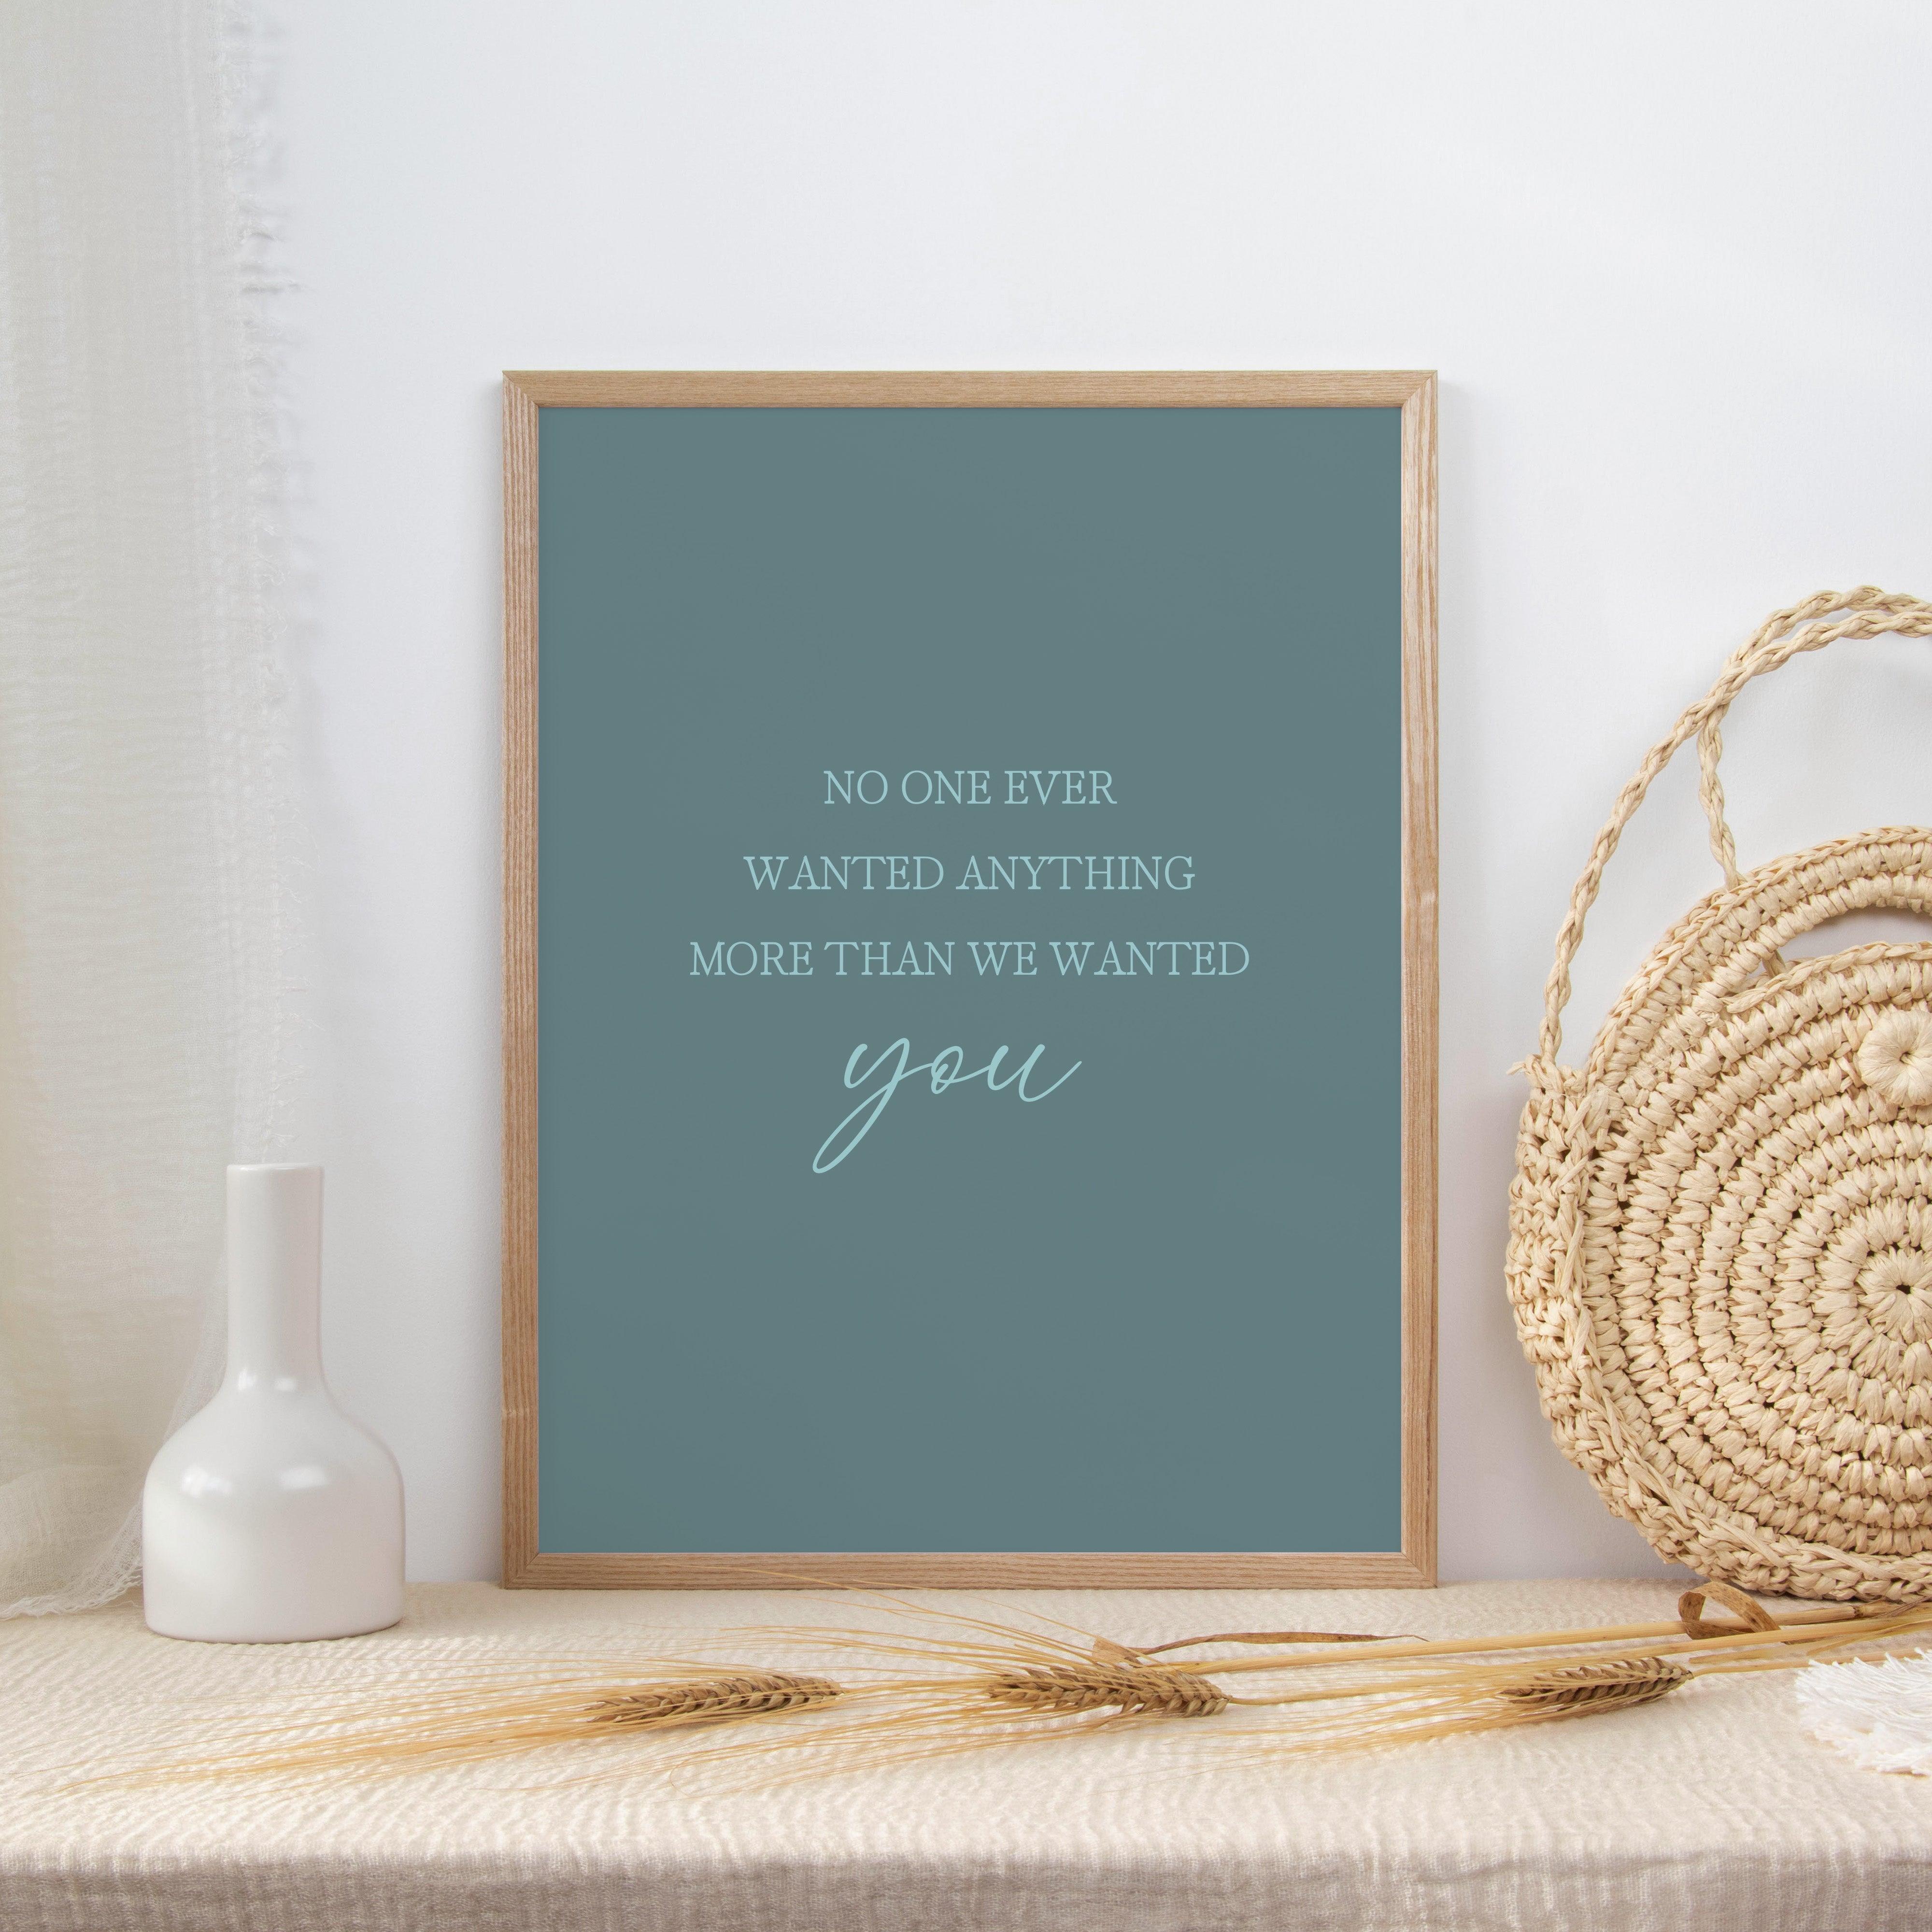 More Than We Wanted You - Juniper - Quote Print Poster - The Willow Corner